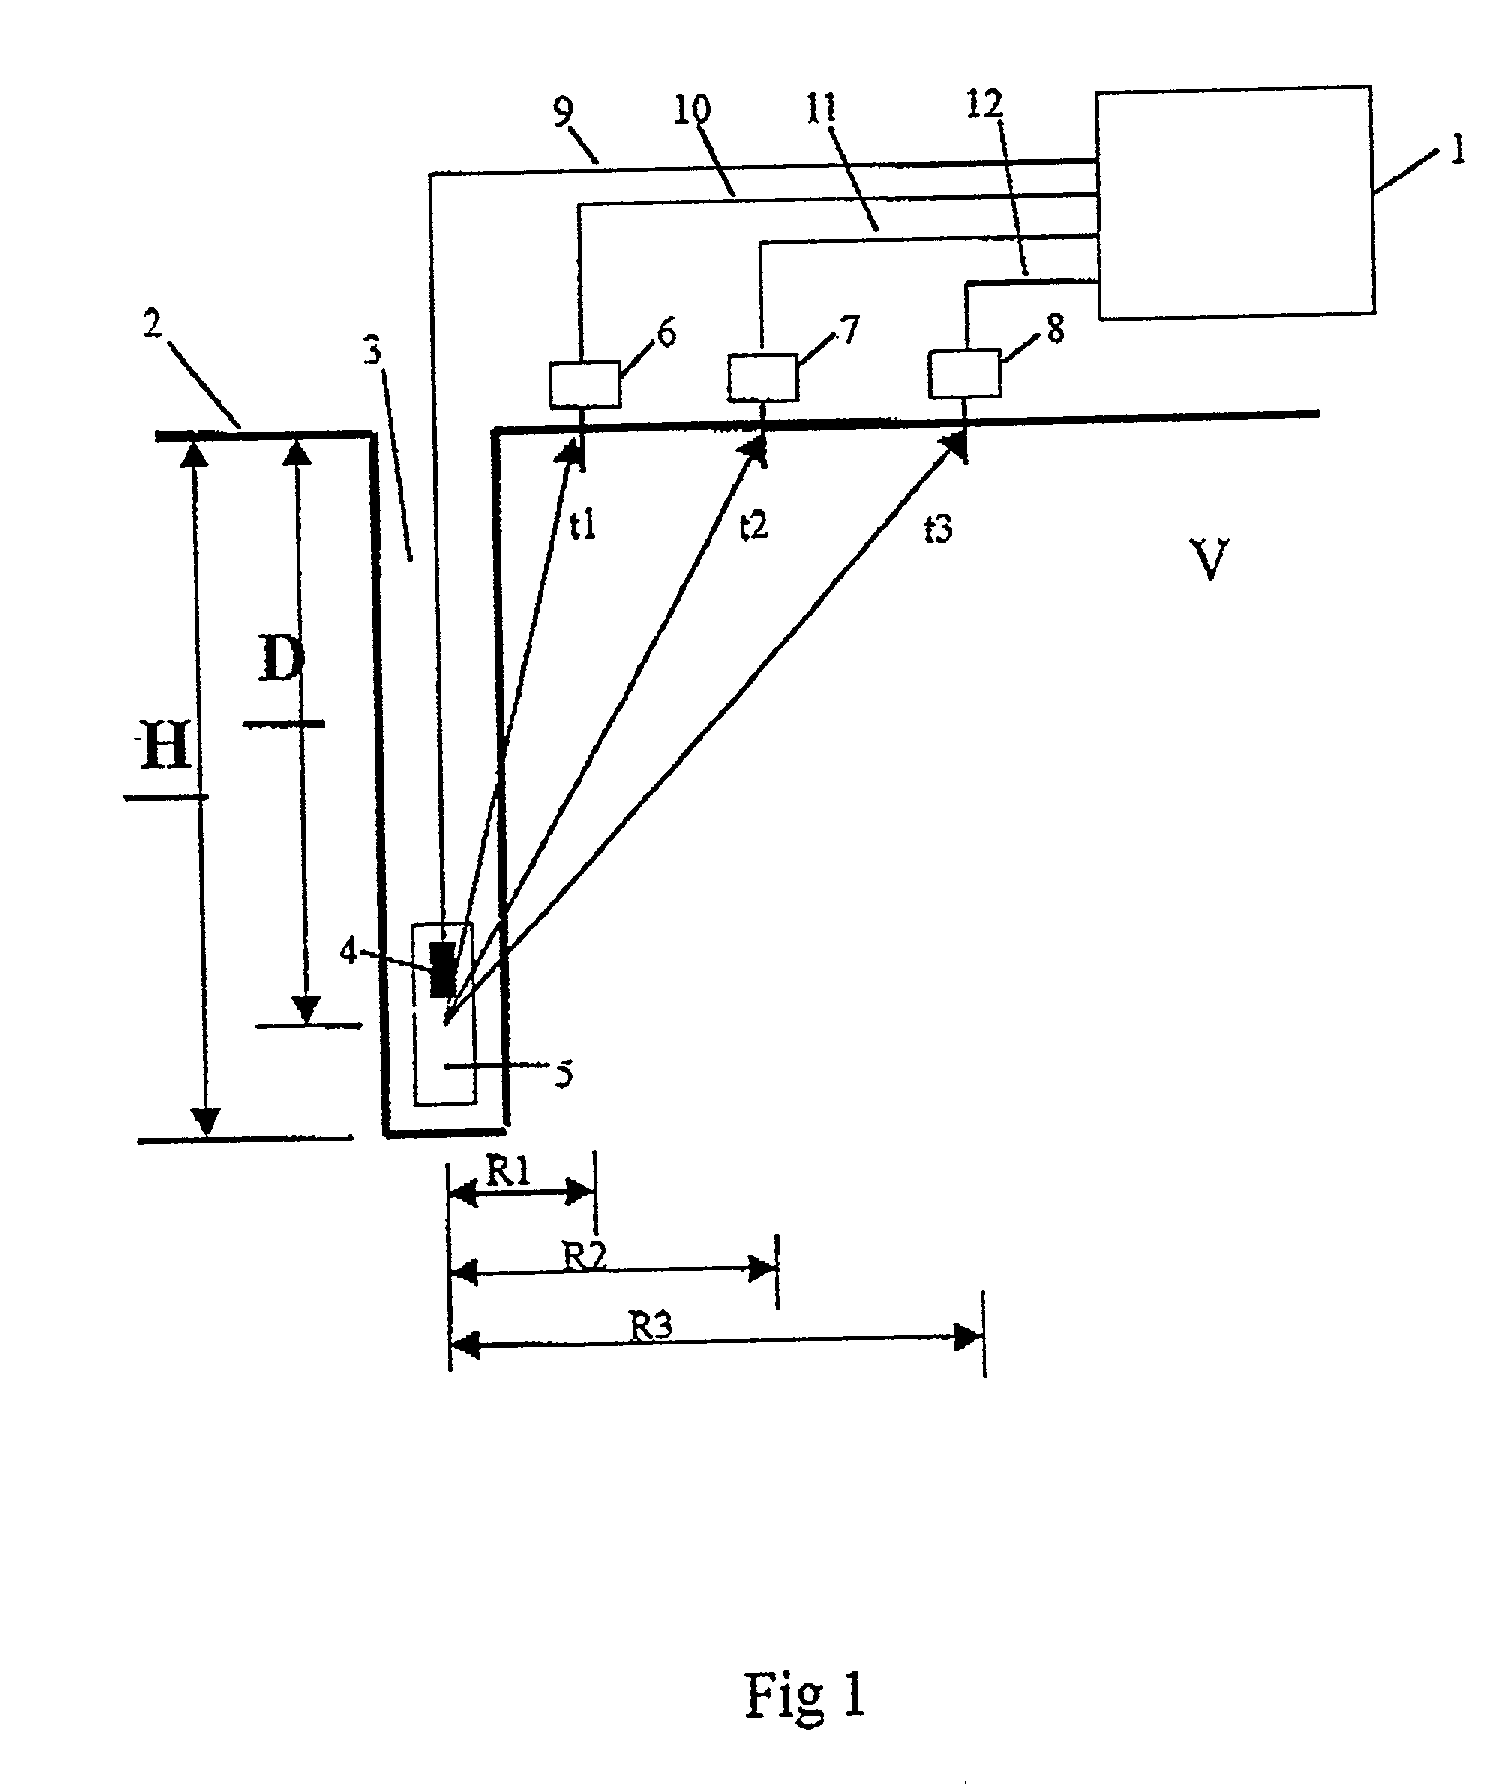 Method and apparatus for determining blaster detonation time and first arrival time of seismic wave